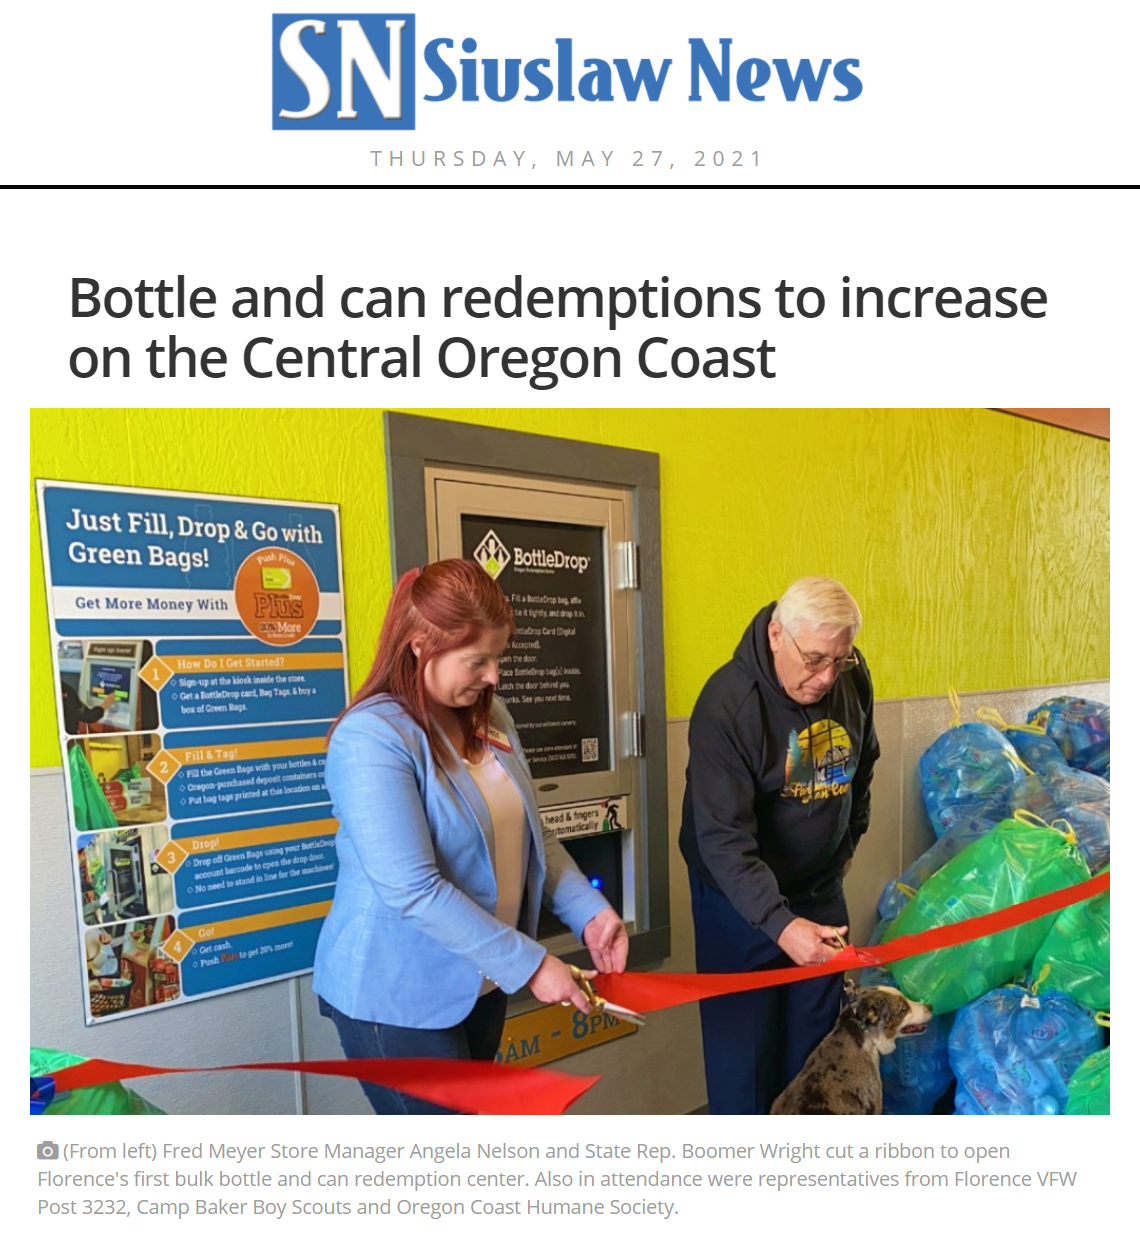 Siuslaw News Article on BottleDrop Grand Opening